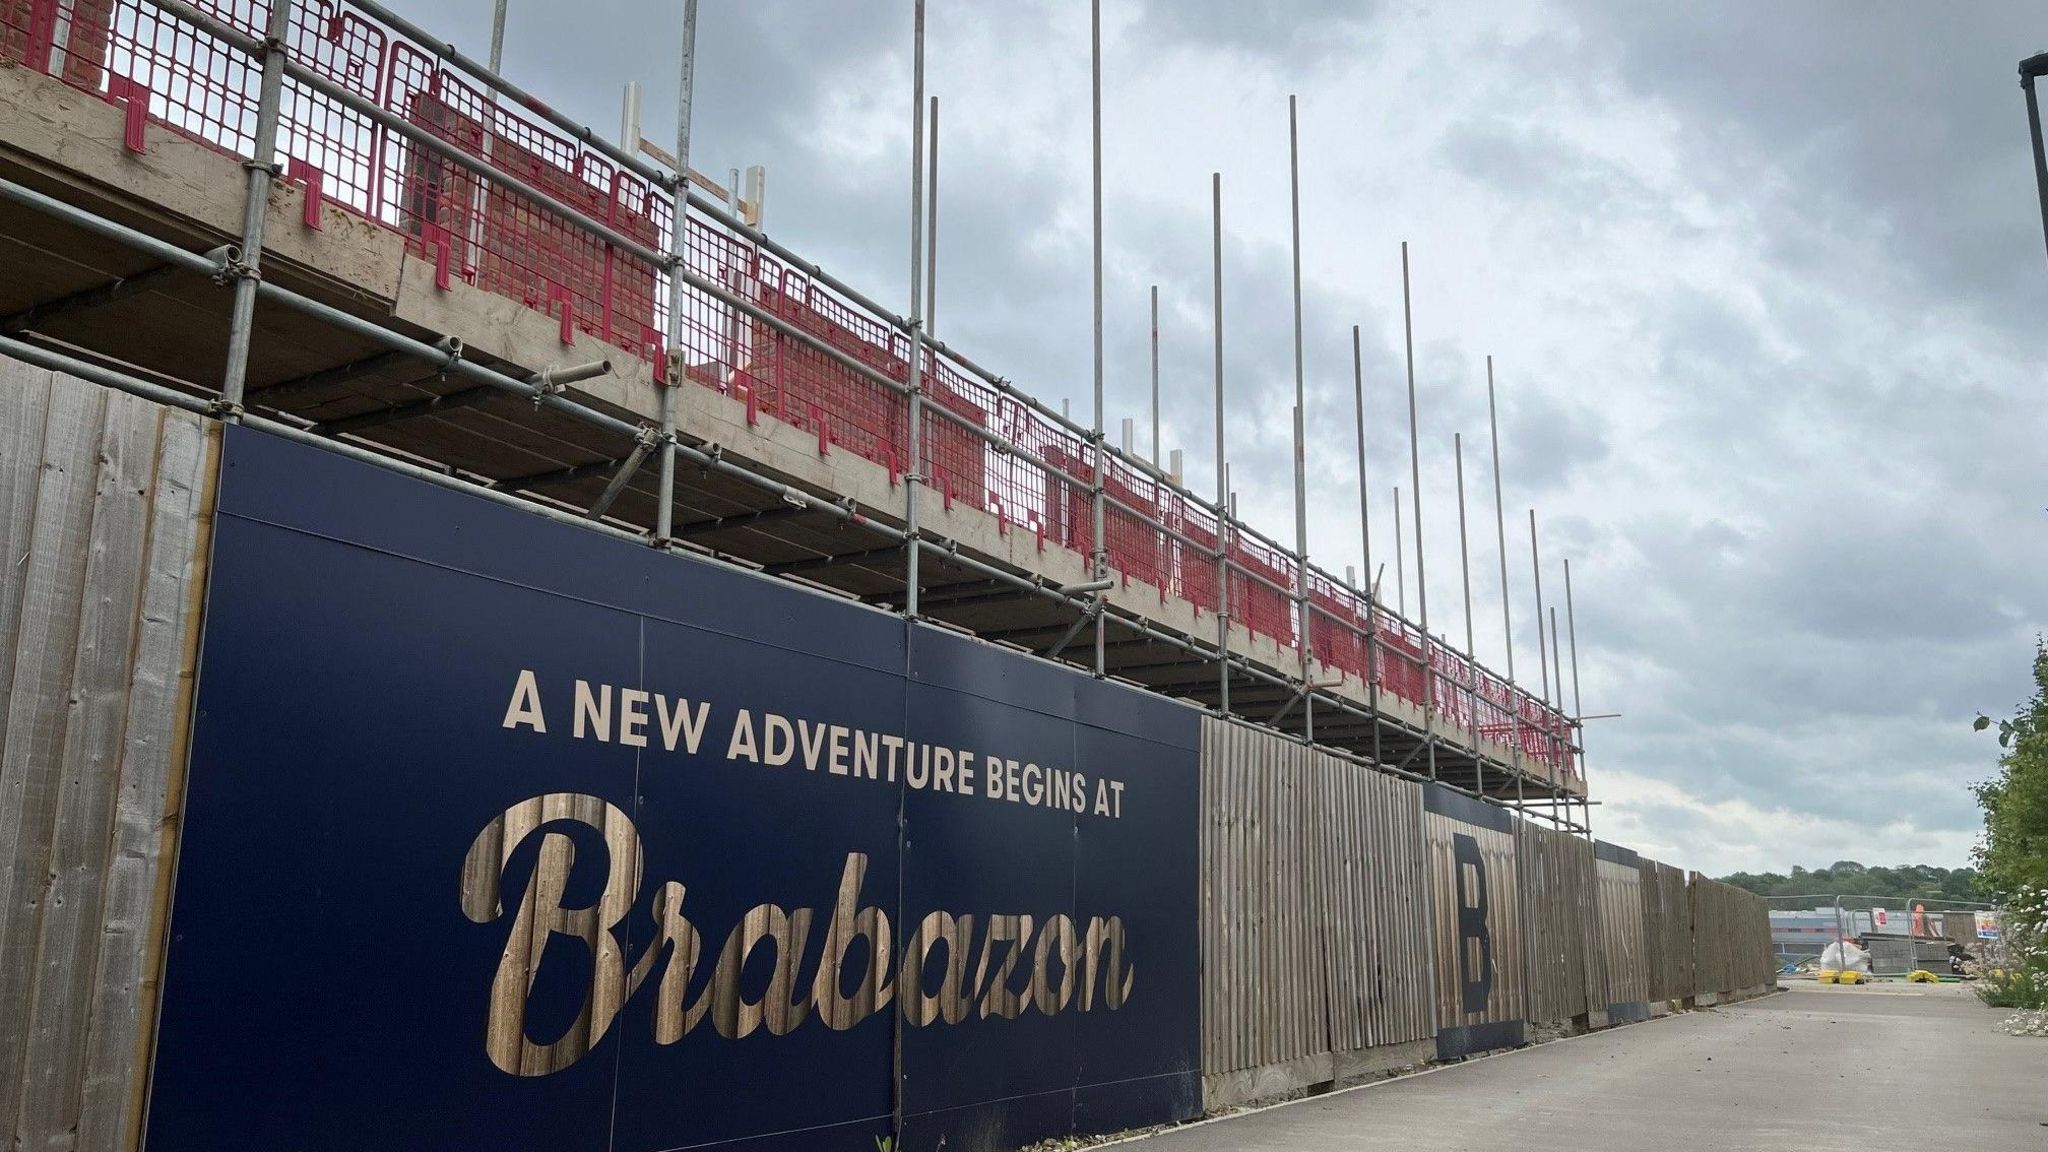 A sign saying "A new adventure begins at Brabazon" on a fence infront of new homes being built